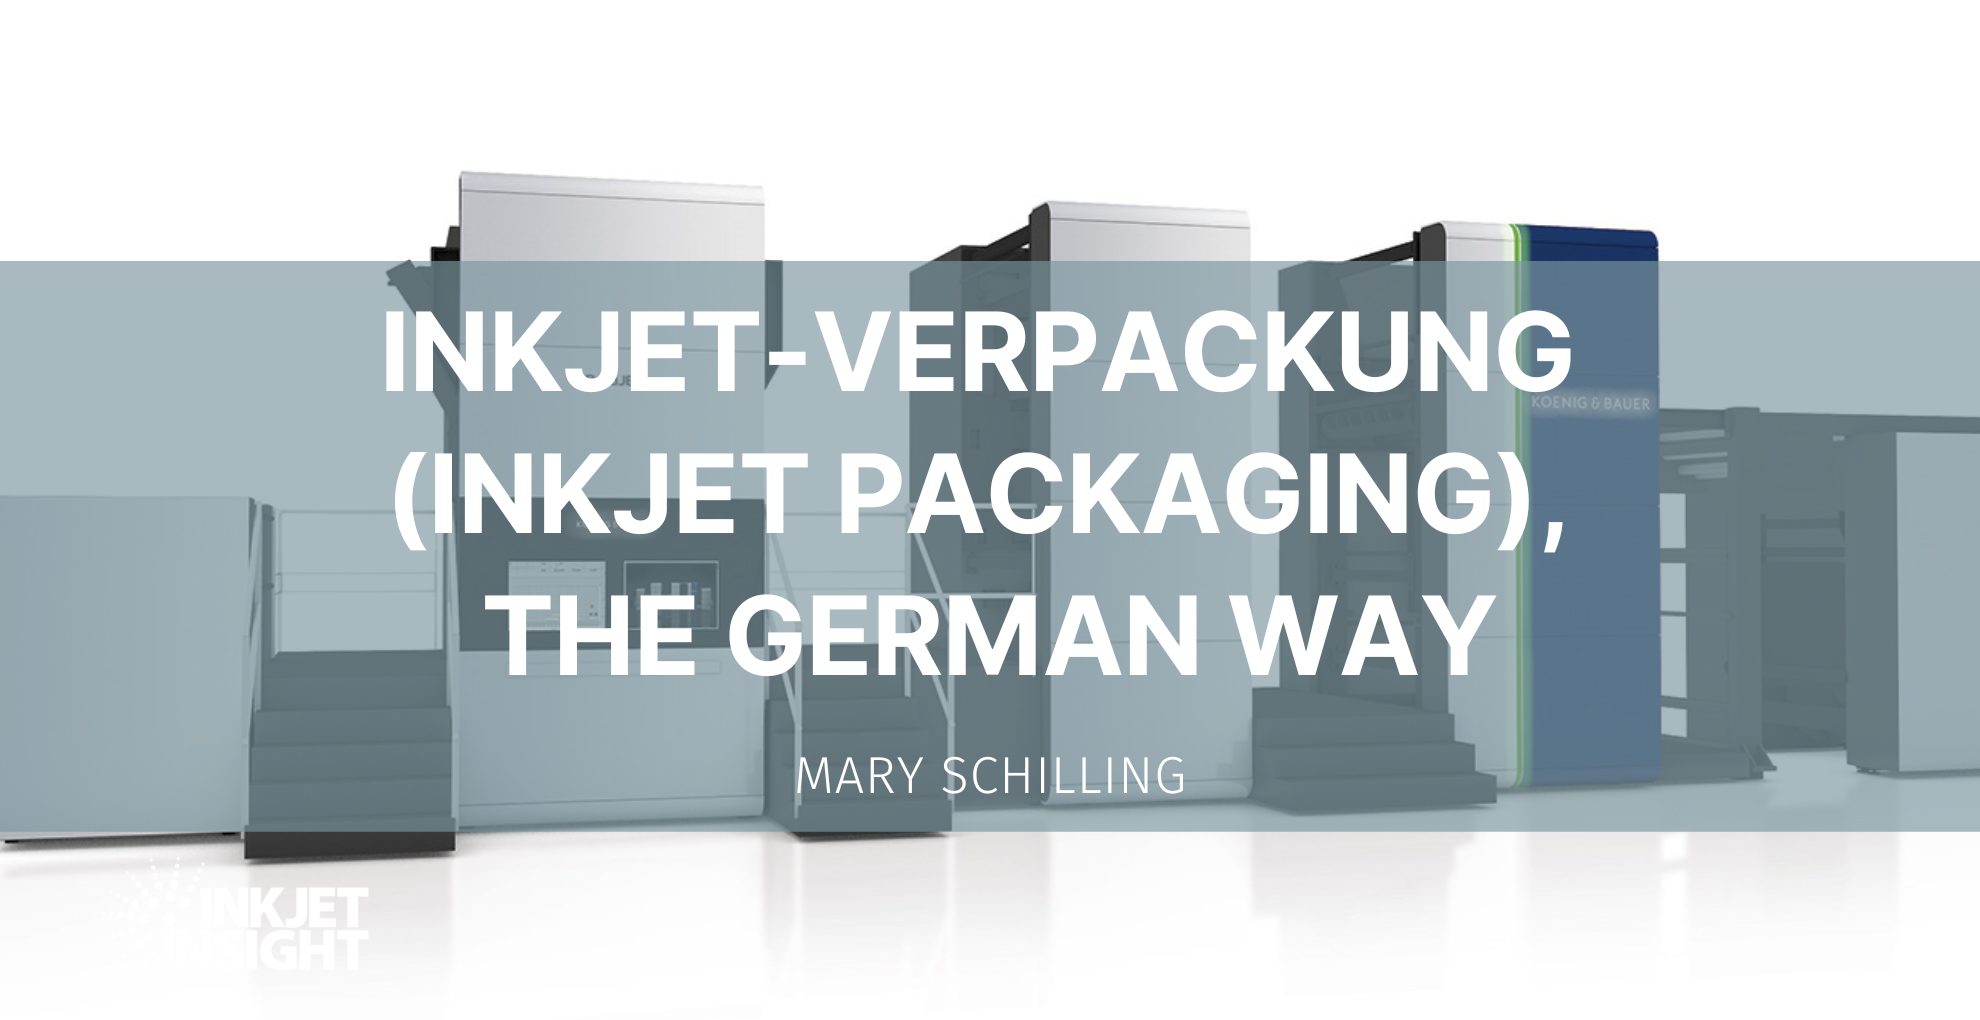 Featured image for “Inkjet-Verpackung (Inkjet Packaging), the German Way”